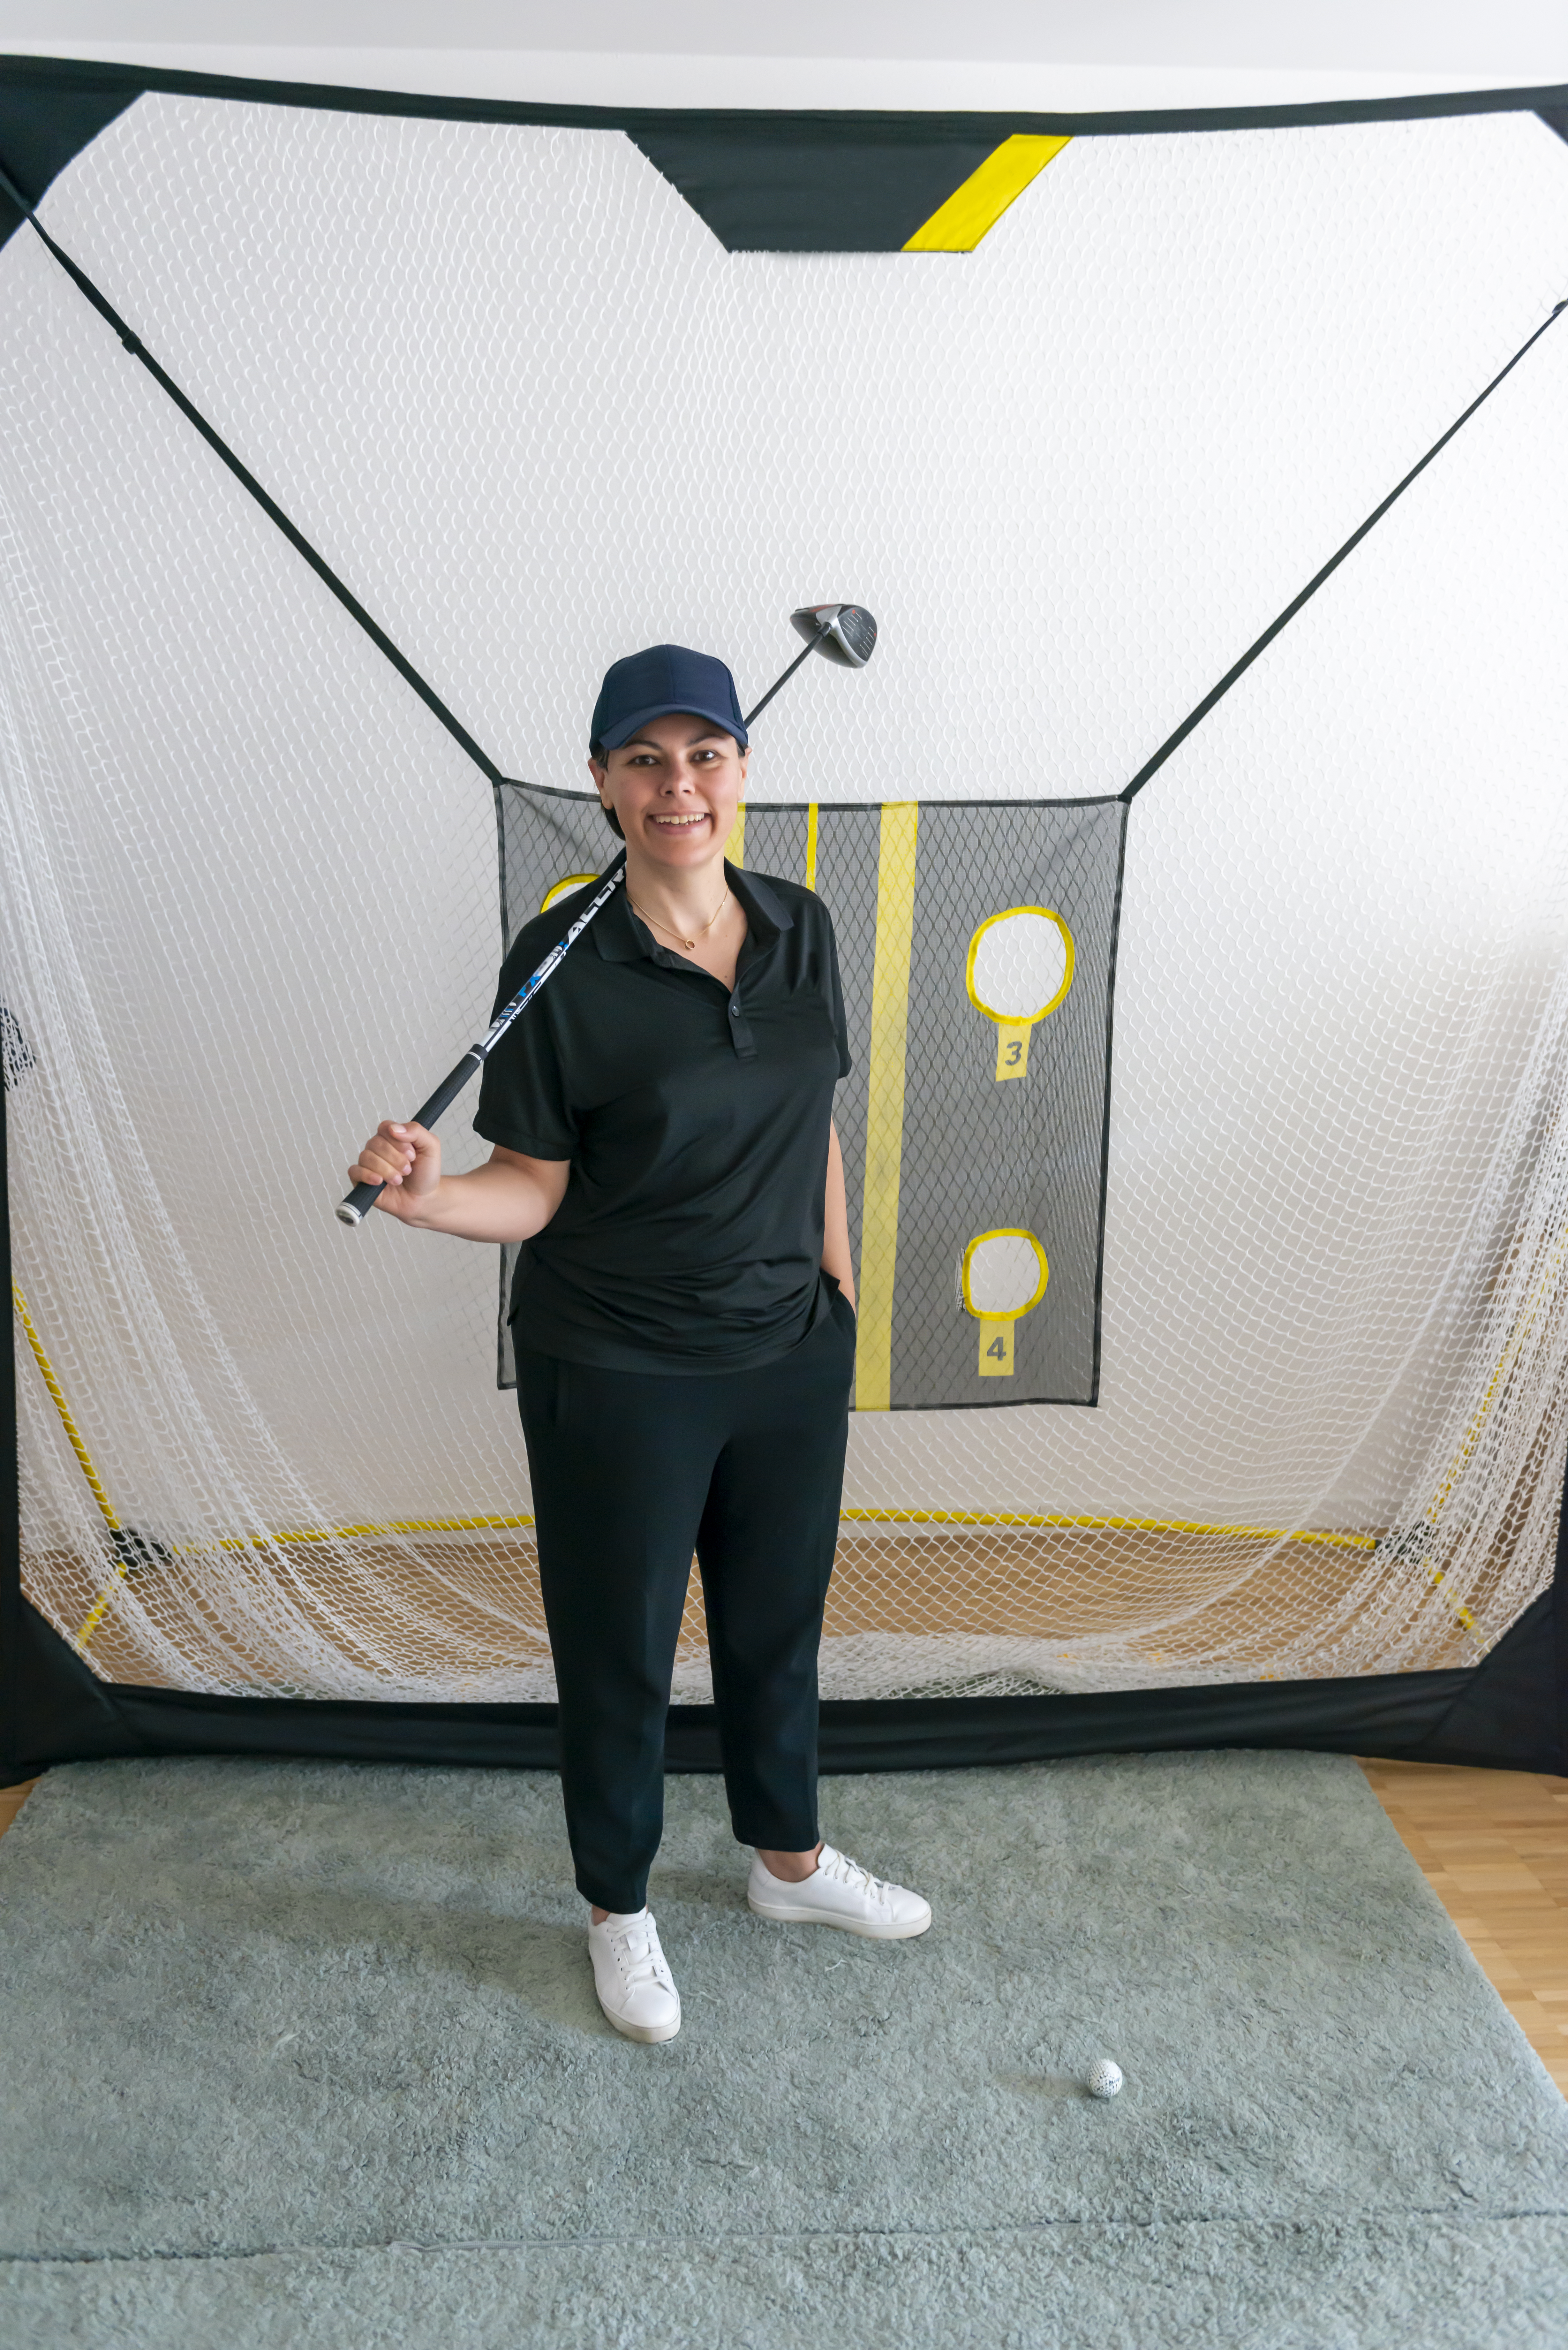 A golfer standing by her indoor golfing net | Source: Getty Images